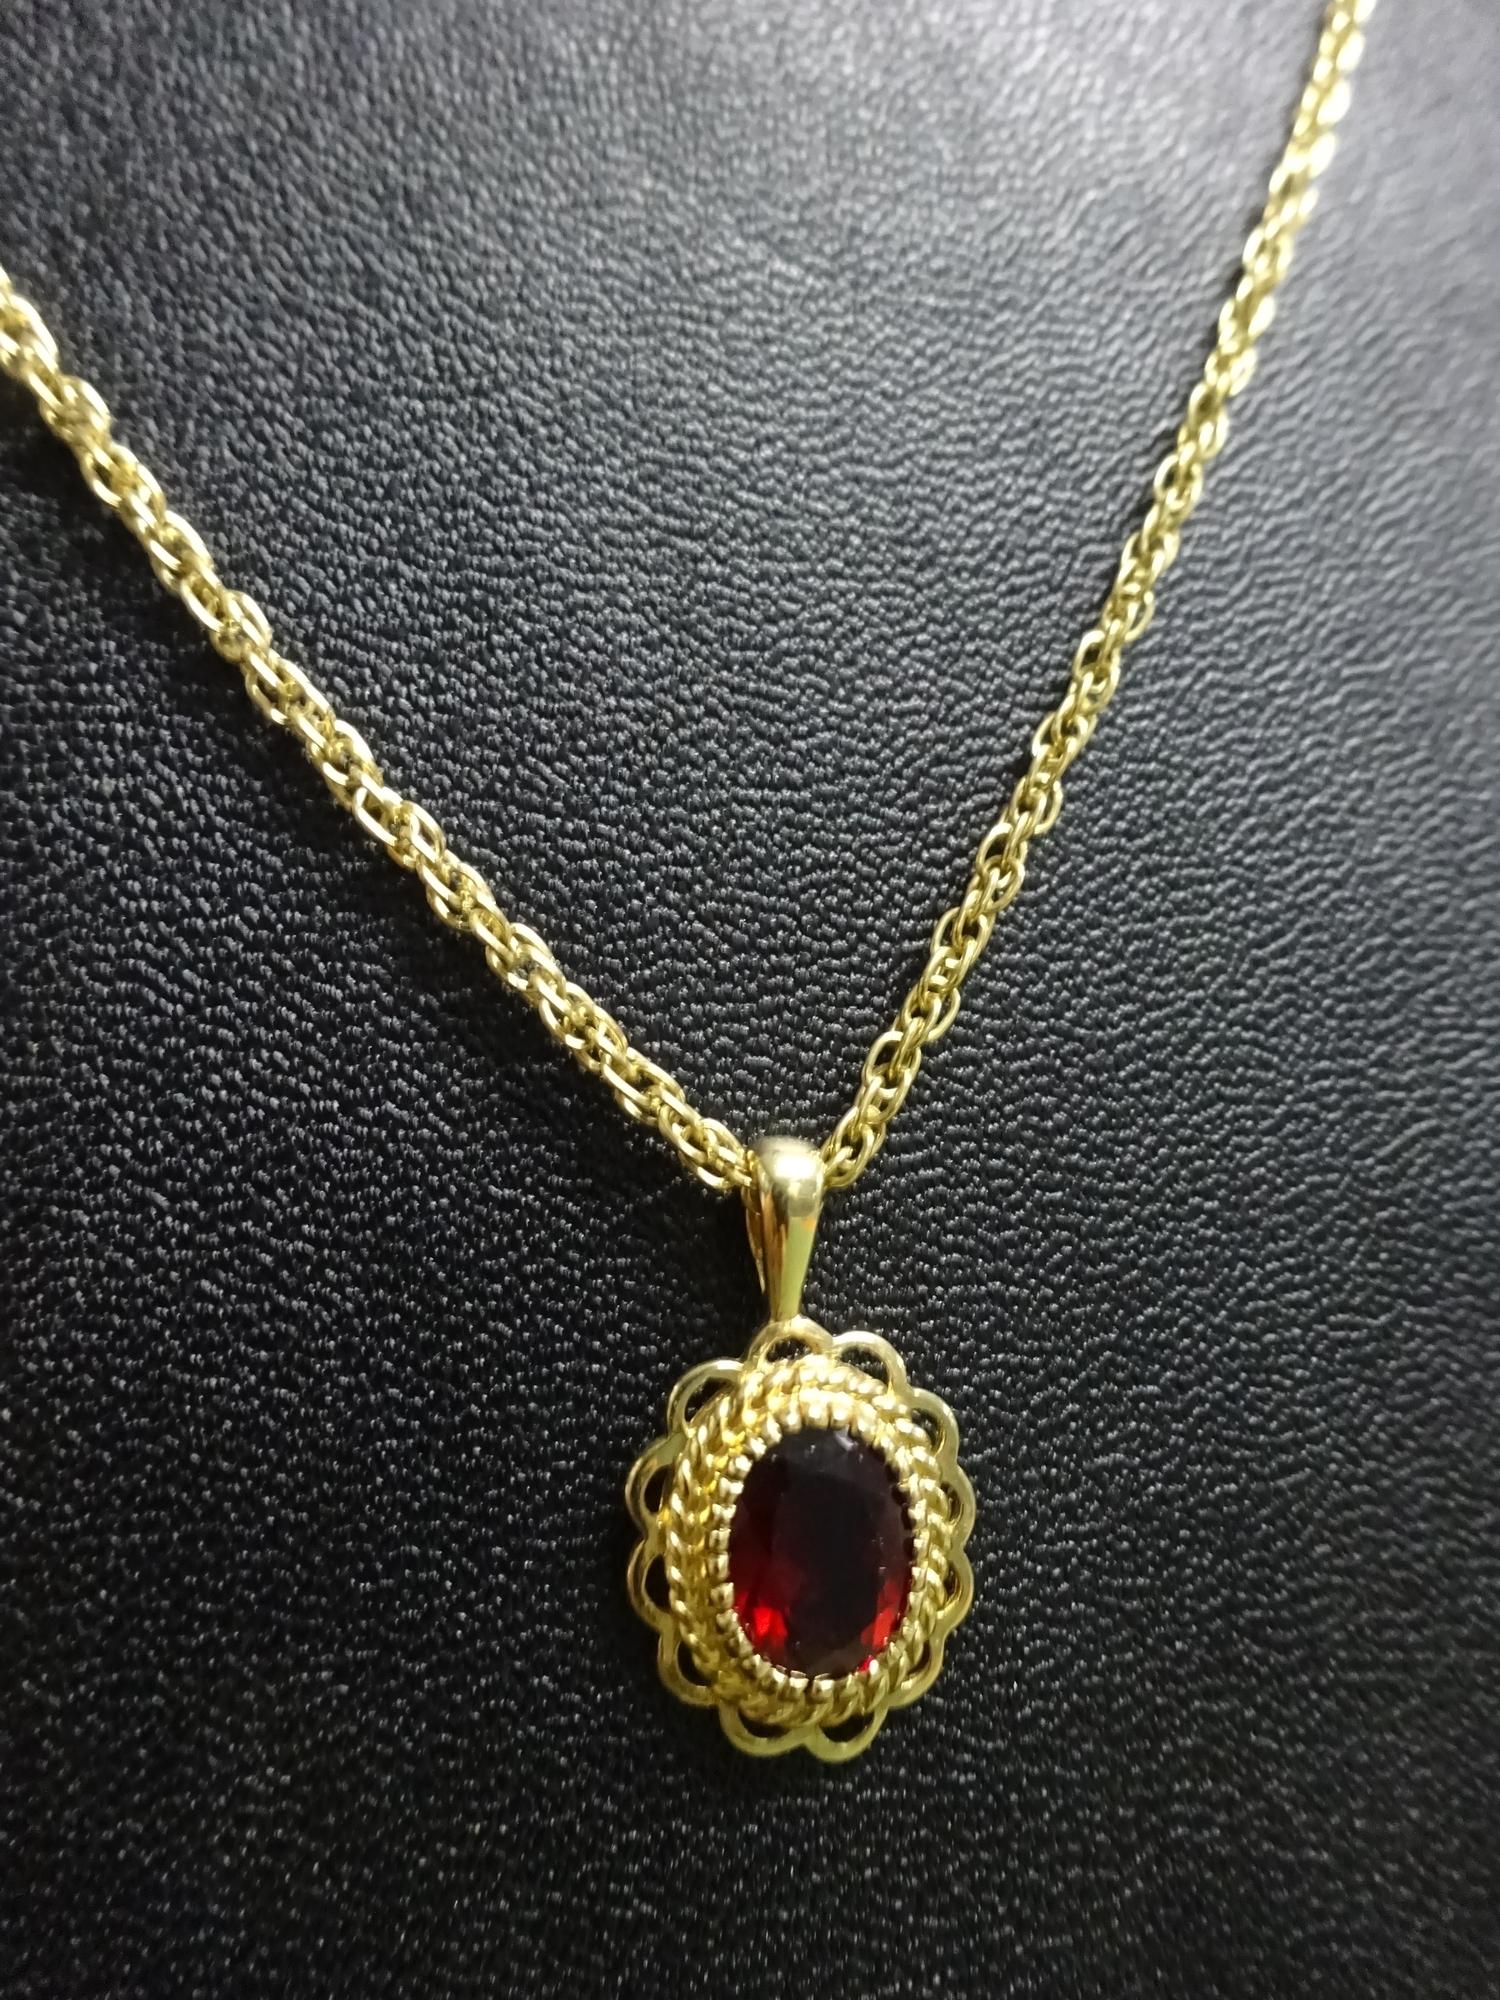 9ct gold fine necklace with 9ct gold pendant having a oval dark red stone, total weight 4.5g - Image 2 of 2